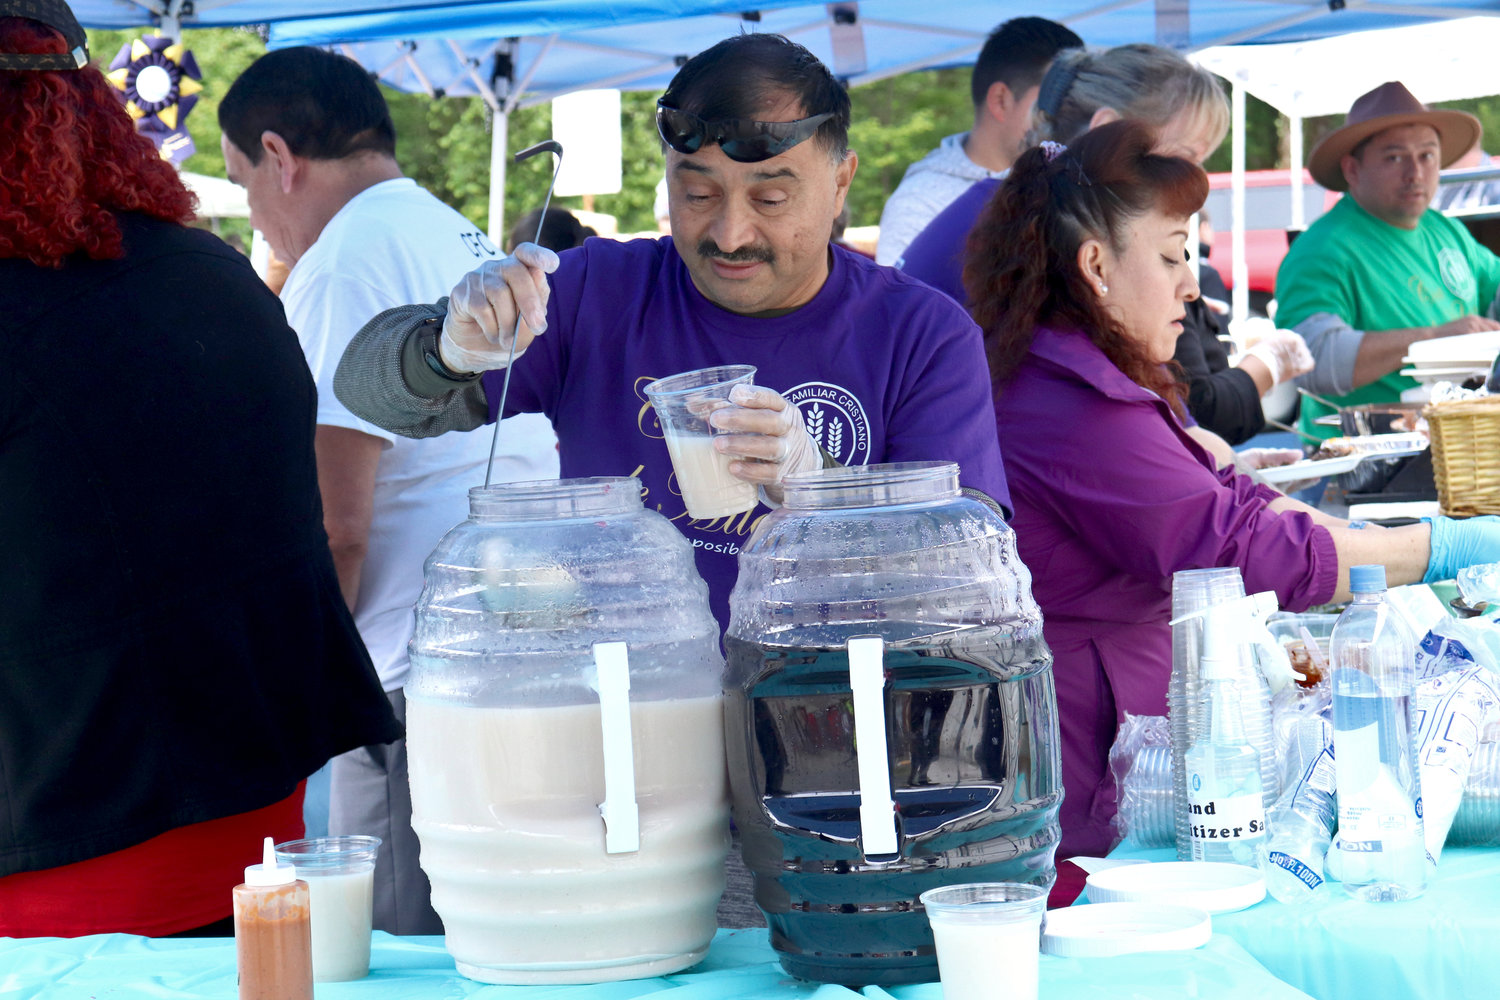 A volunteer with Iglesia Centro Familiar Cristiano serves horchata during the Swede Day celebration in Rochester on Saturday.